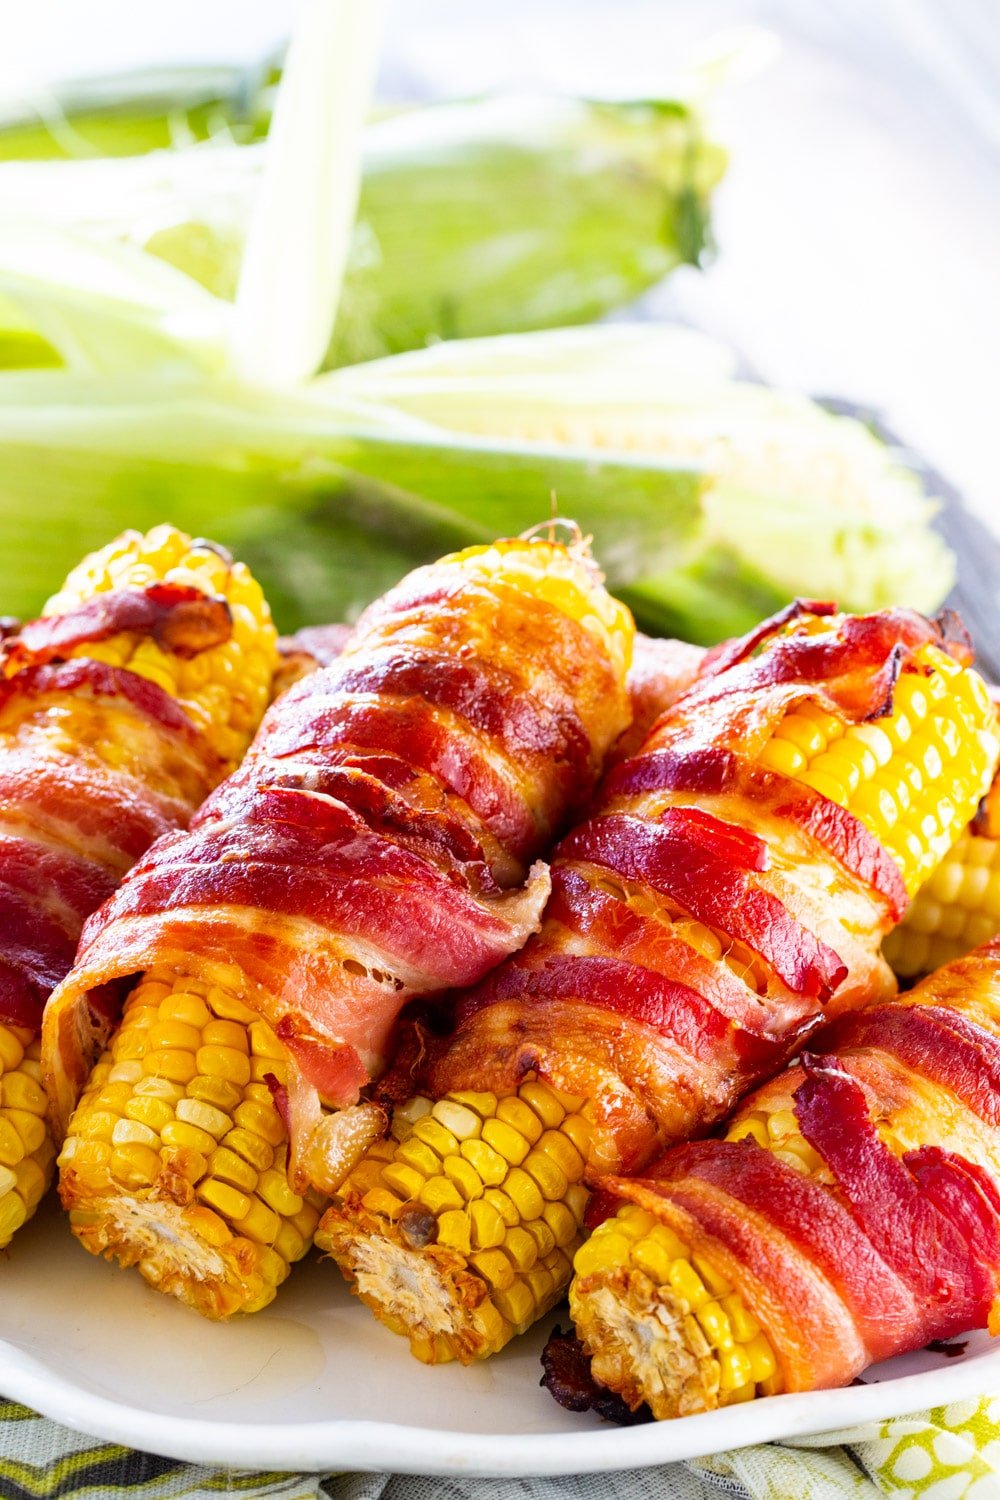 Corn wrapped in bacon on a serving platter.